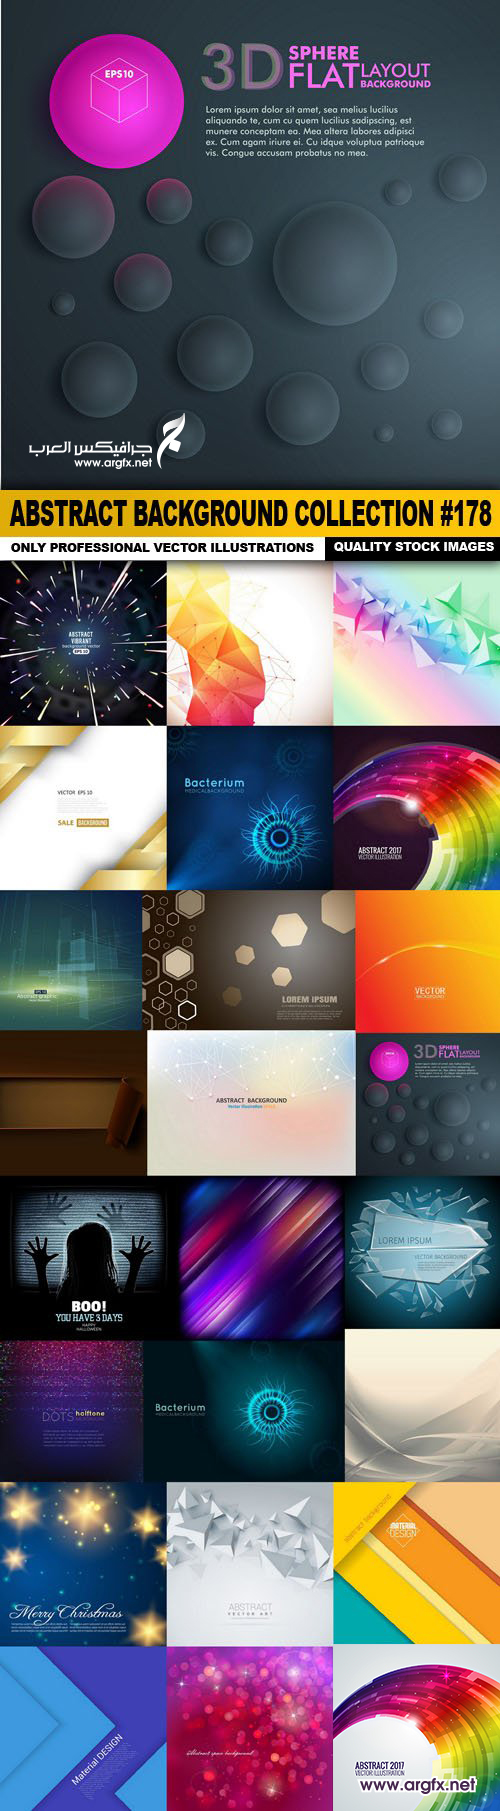  Abstract Background Collection #178 - 27 Vector